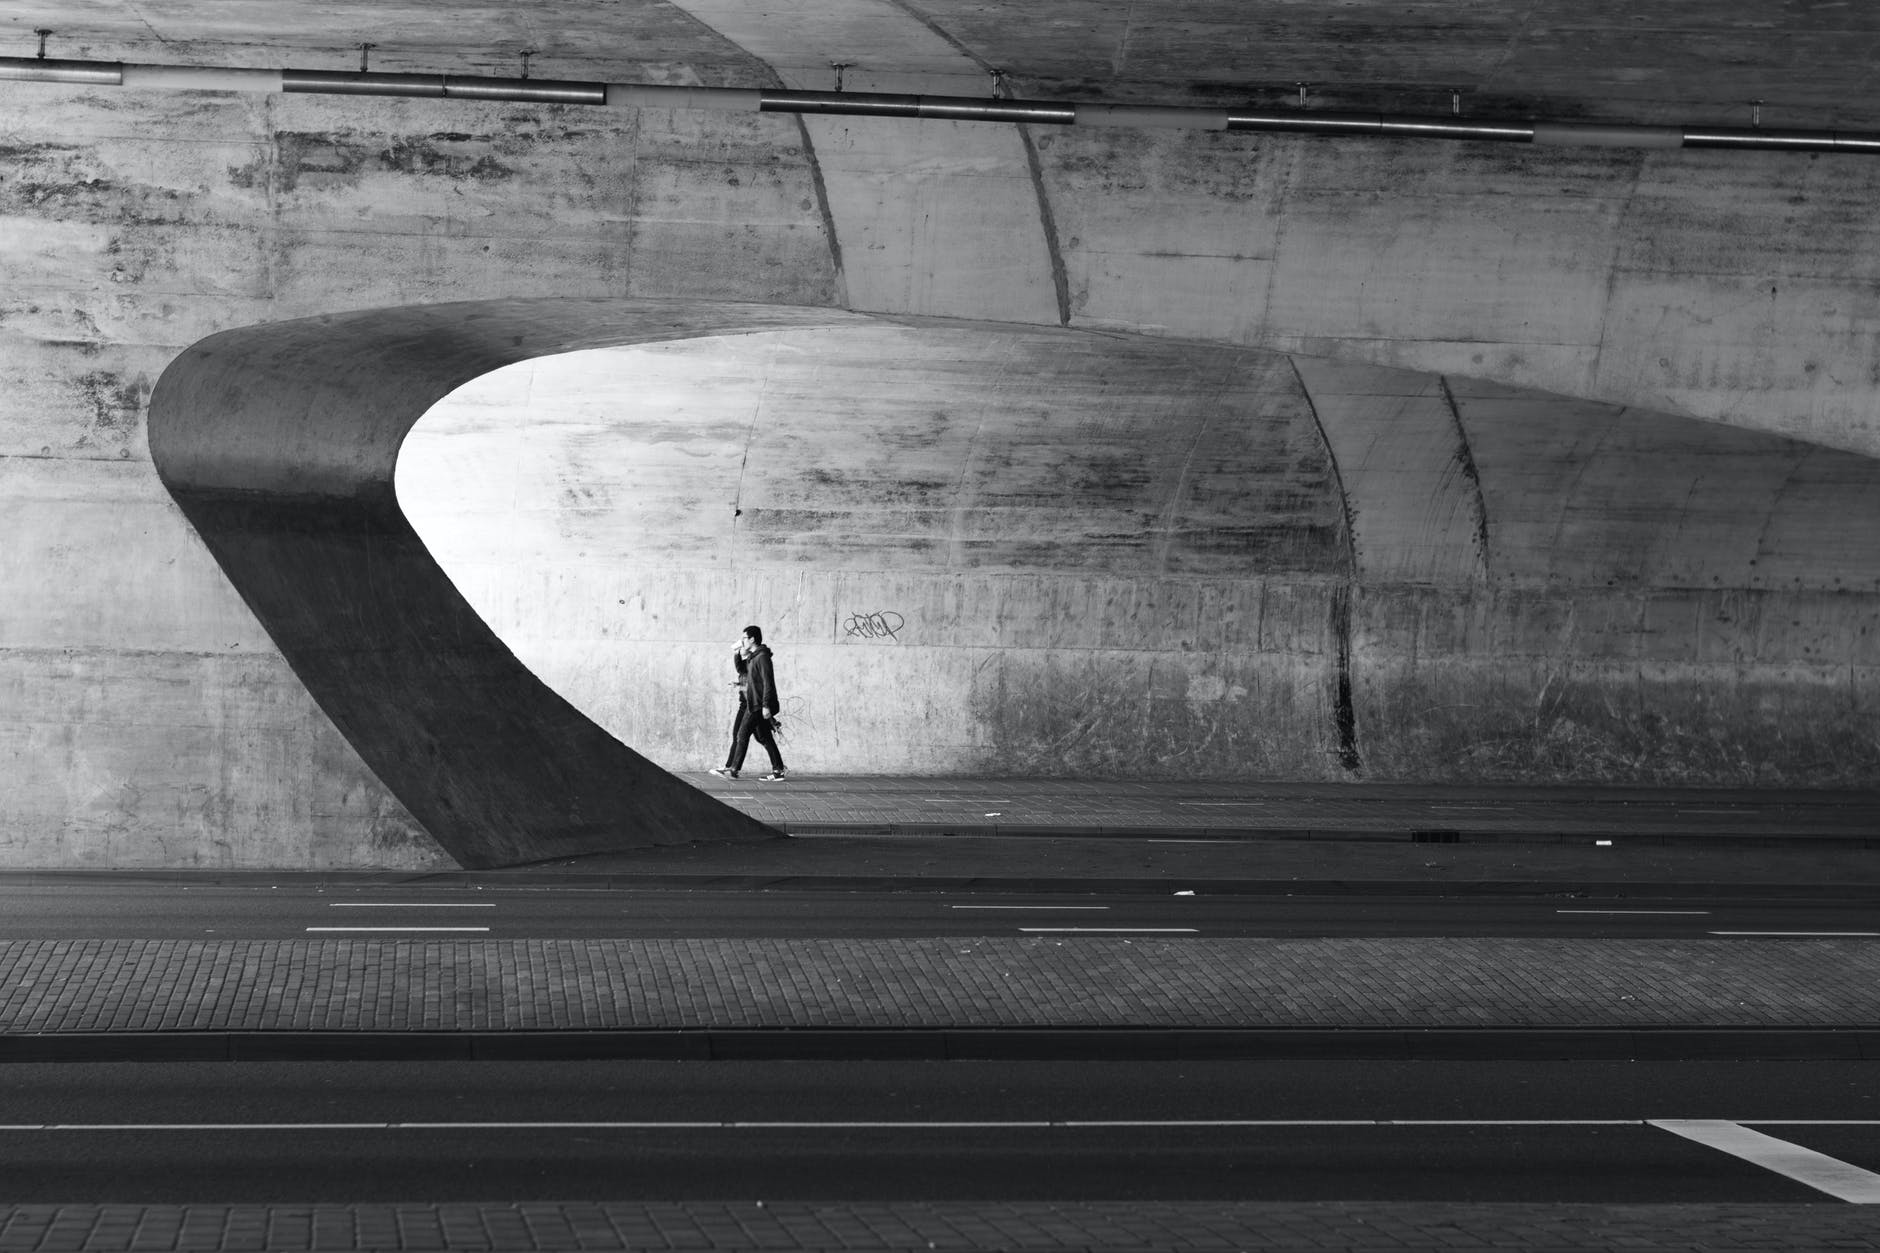 man in tunnel